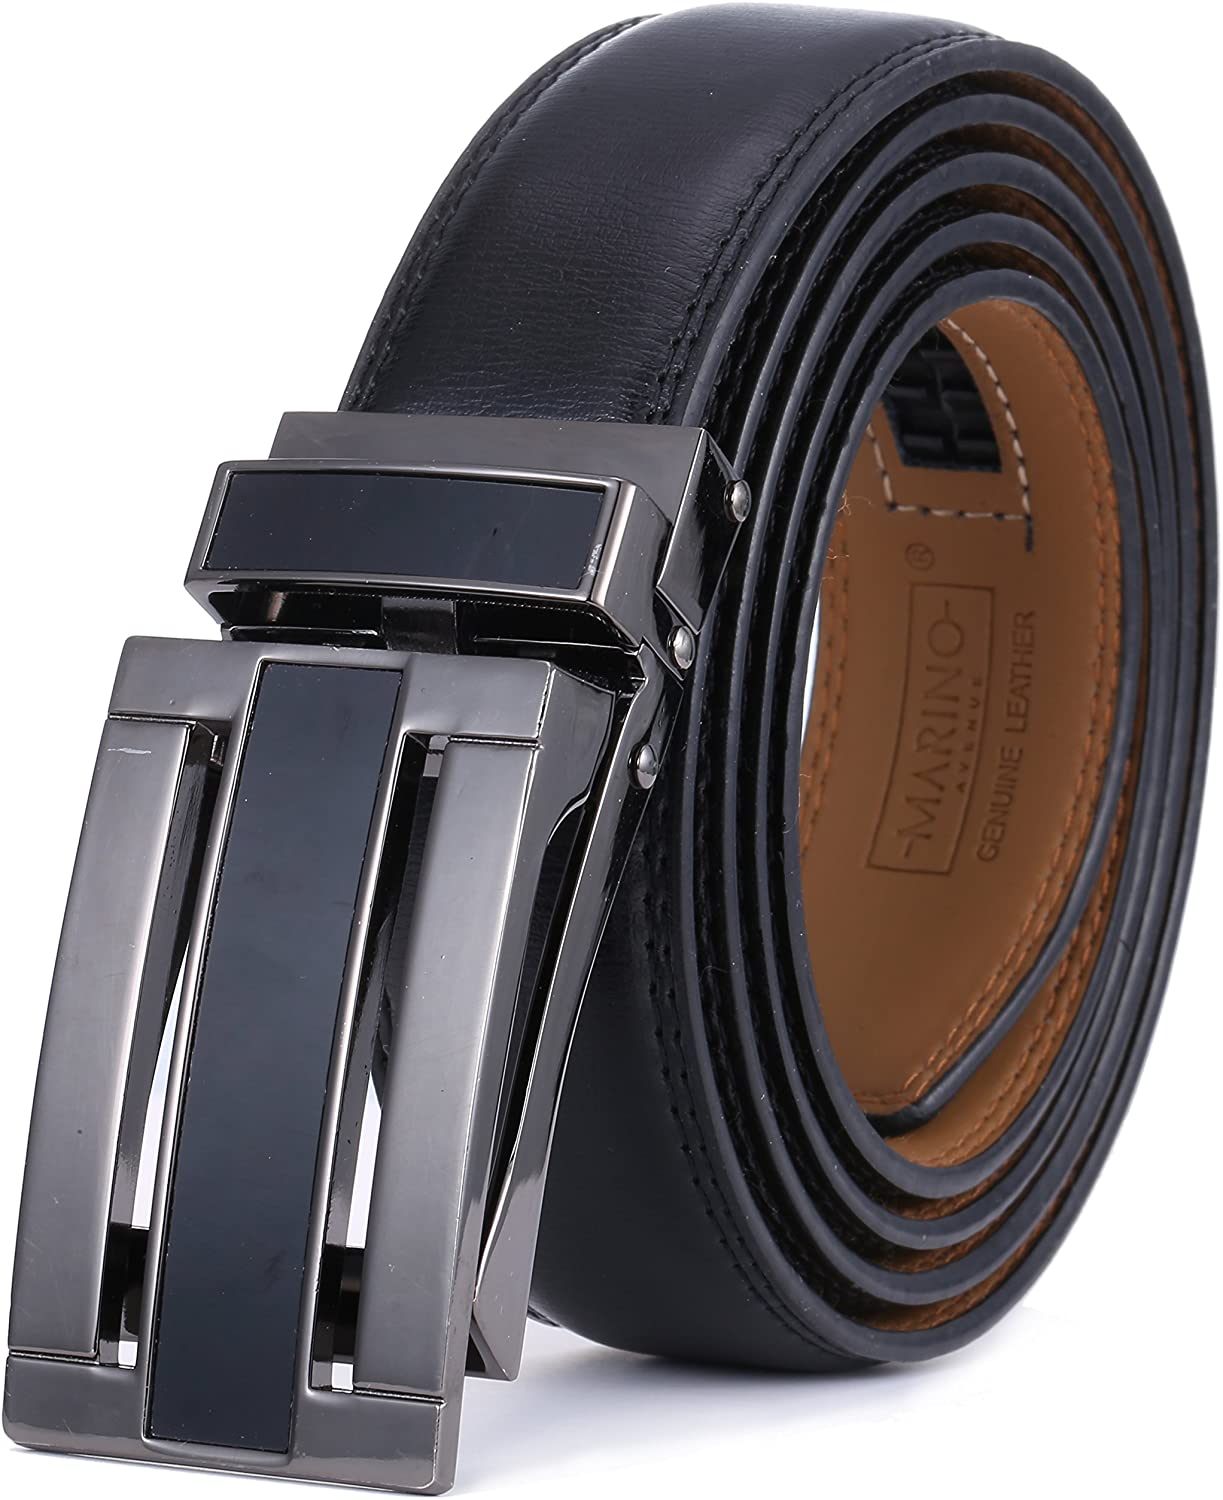 Gift Box Marino Avenue Men’s Genuine Leather Ratchet Dress Belt with Linxx Buckle